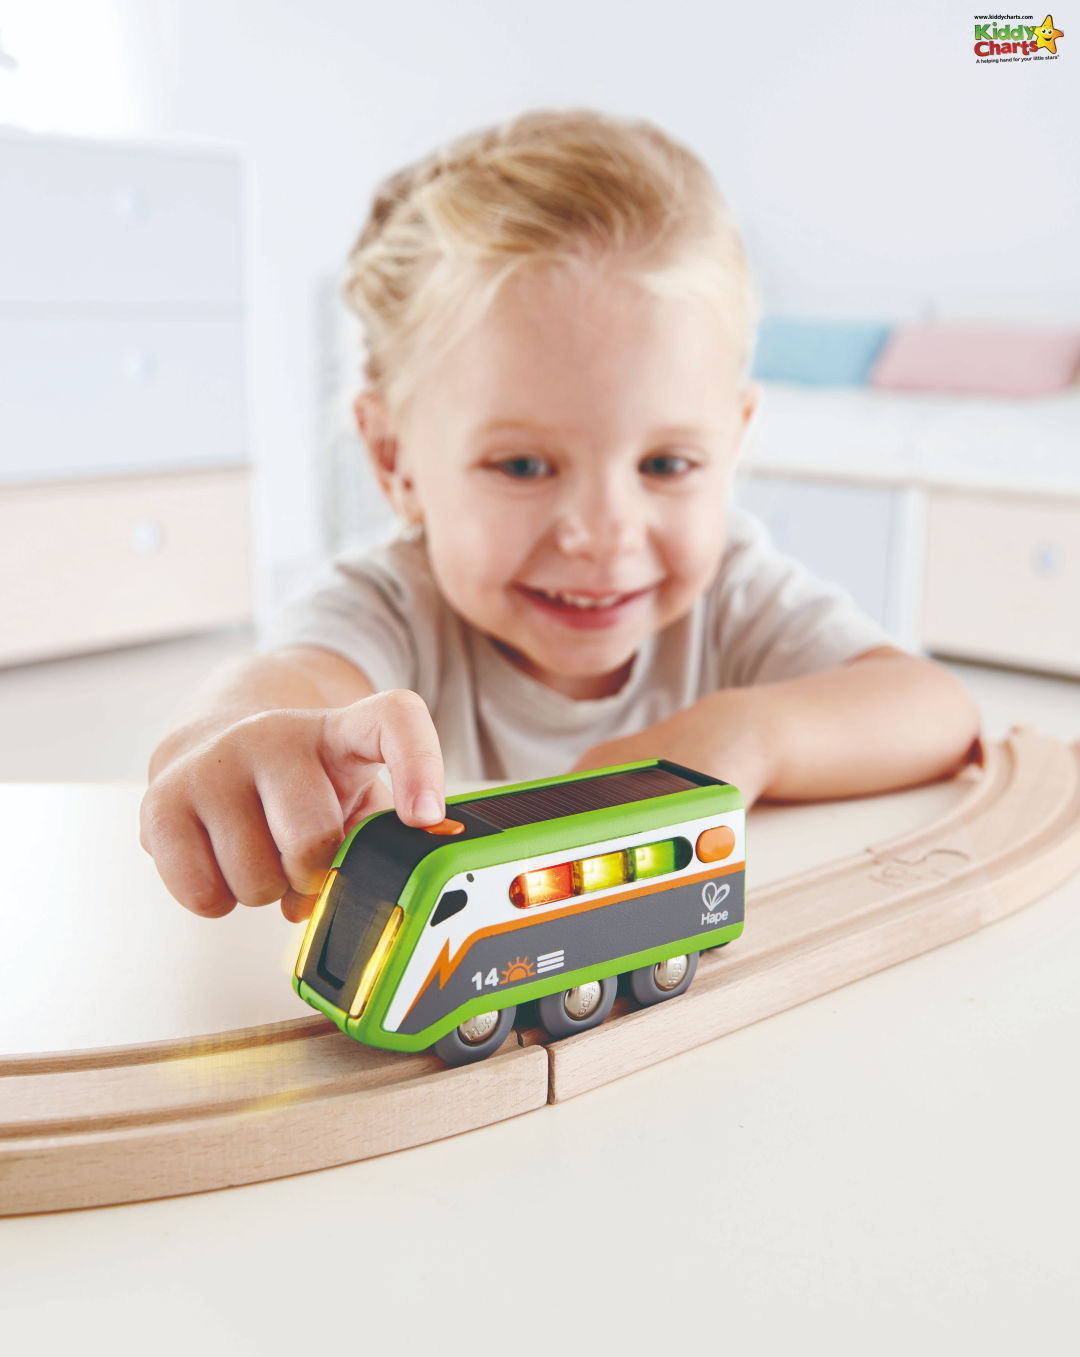 Don’t miss out on the chance to win this almighty MEGA wooden train bundle giveaway from Hape!